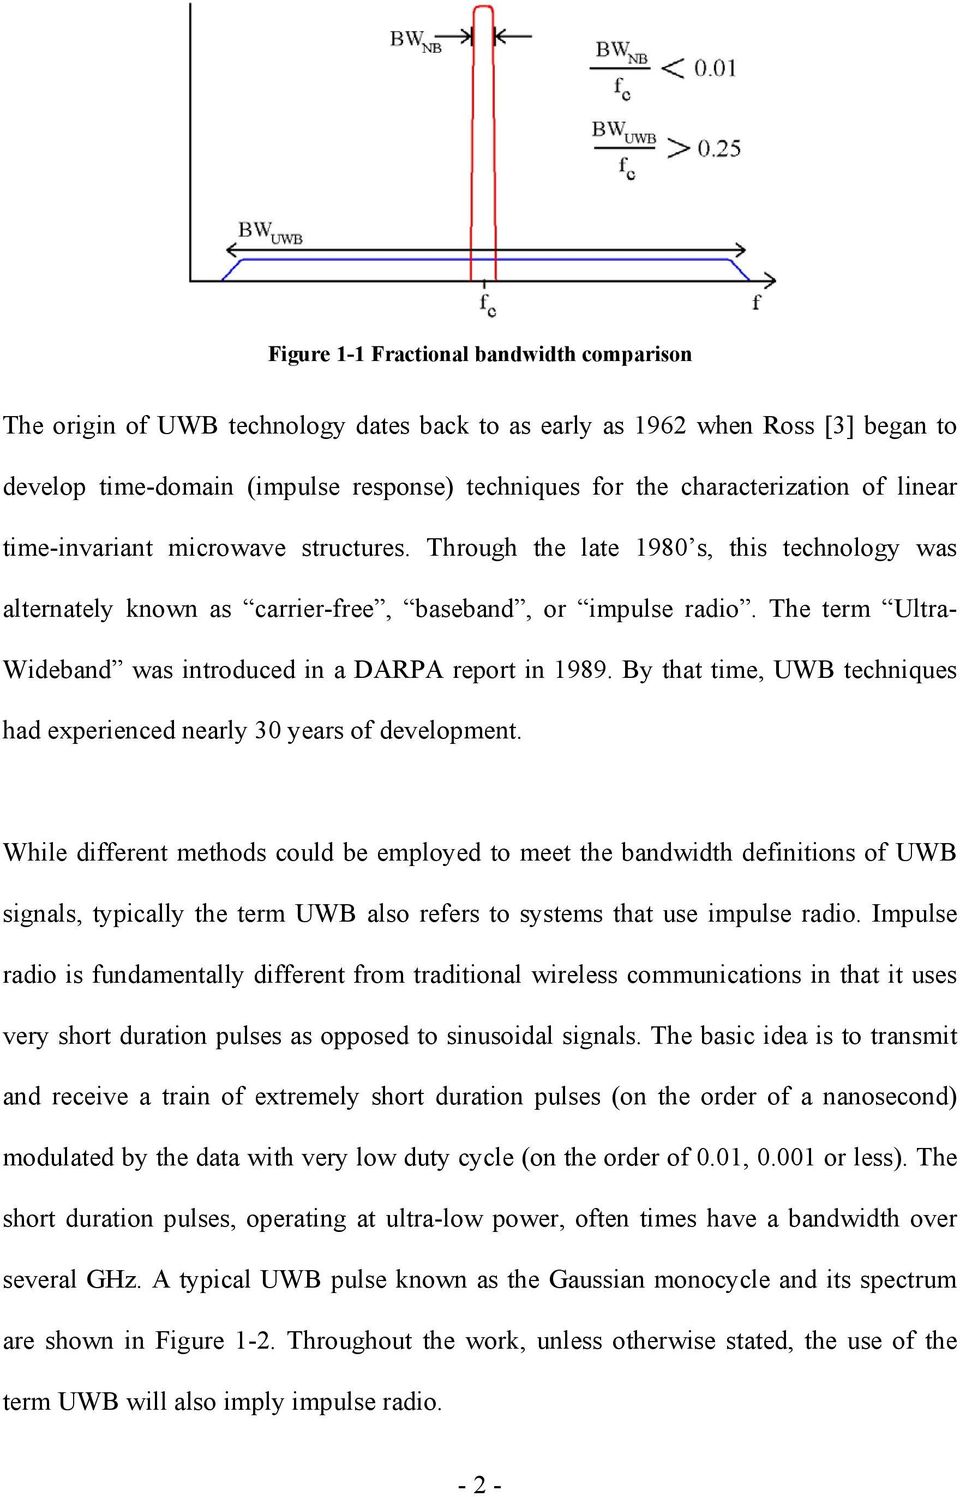 The term Ultra- Wideband was introduced in a DARPA report in 1989. By that time, UWB techniques had experienced nearly 3 years of development.